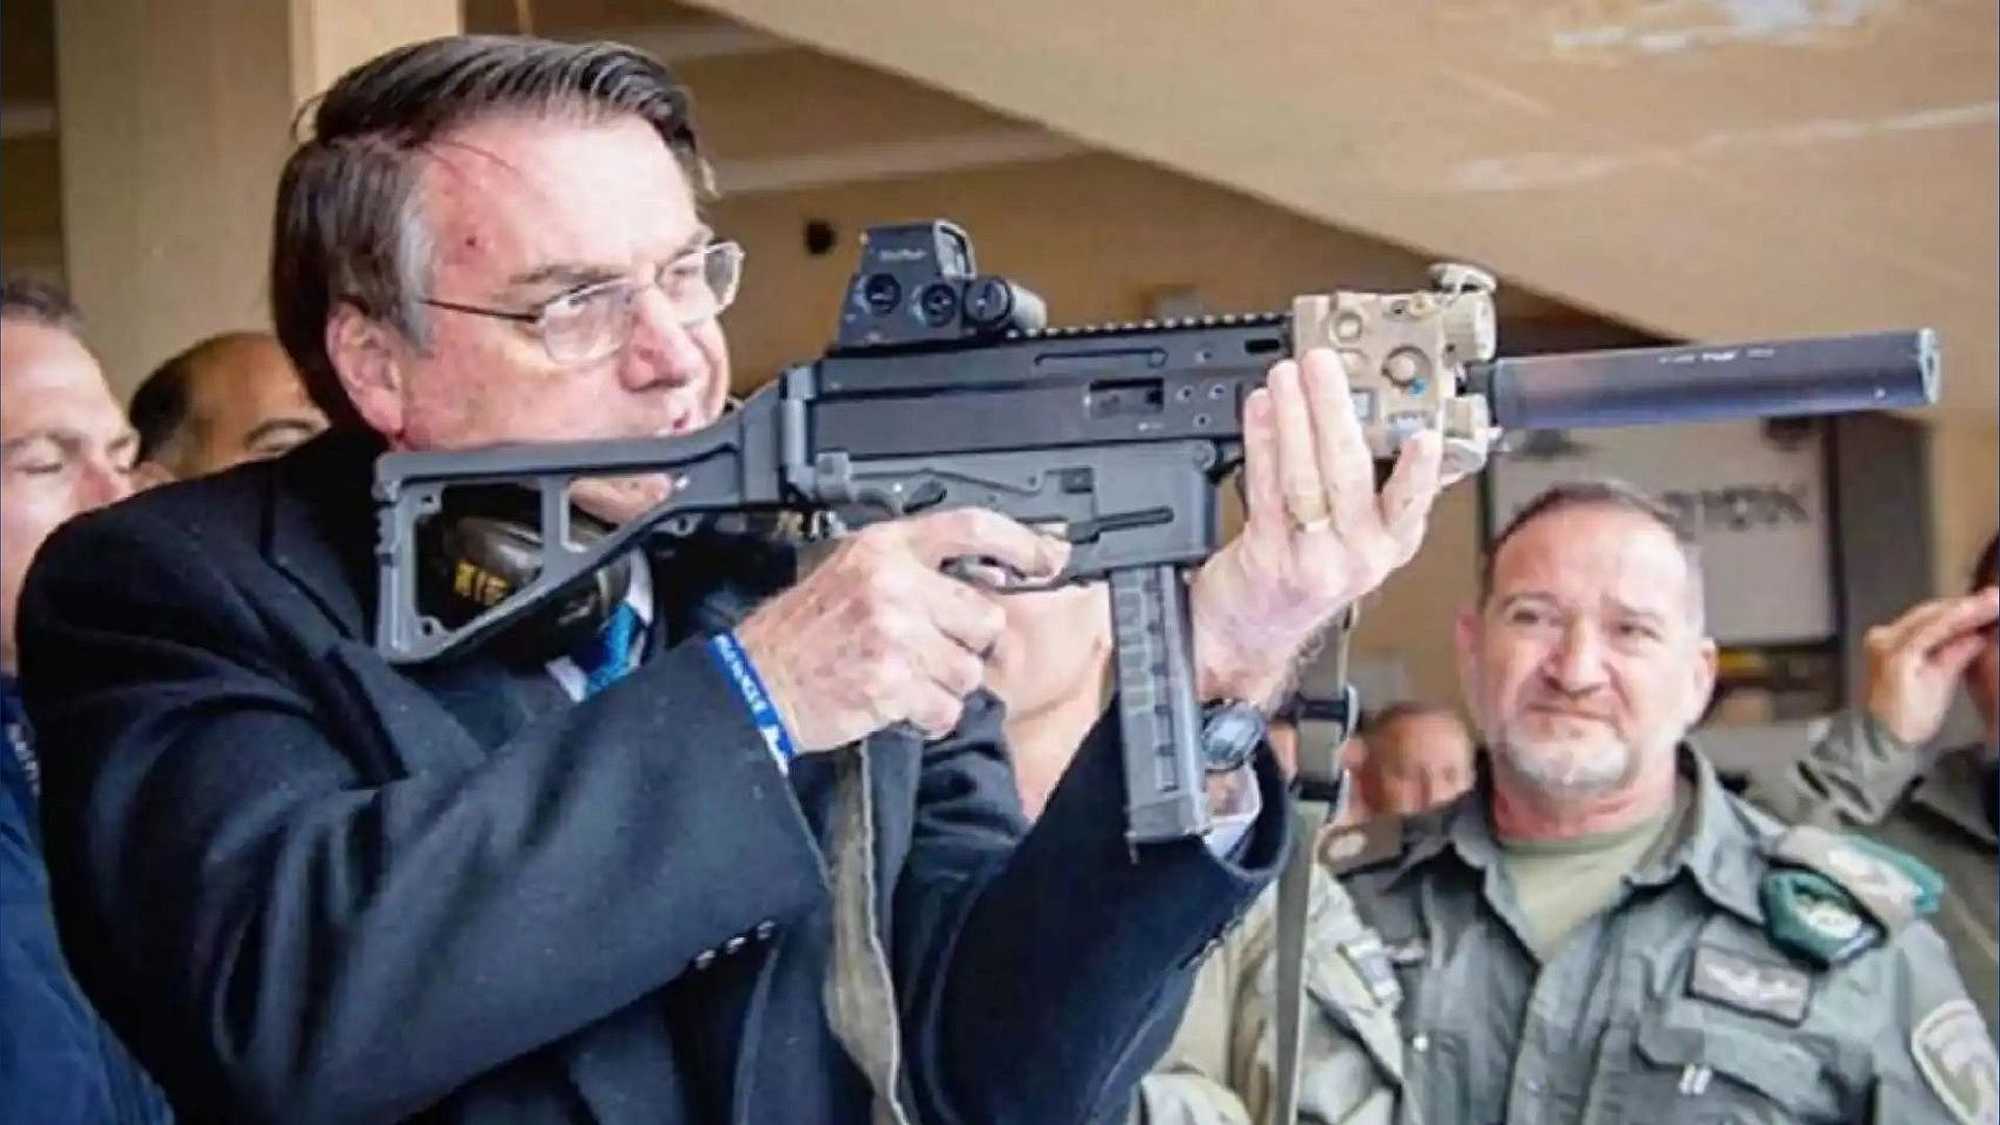 Brazilian President shows his familiarity with a weapon.